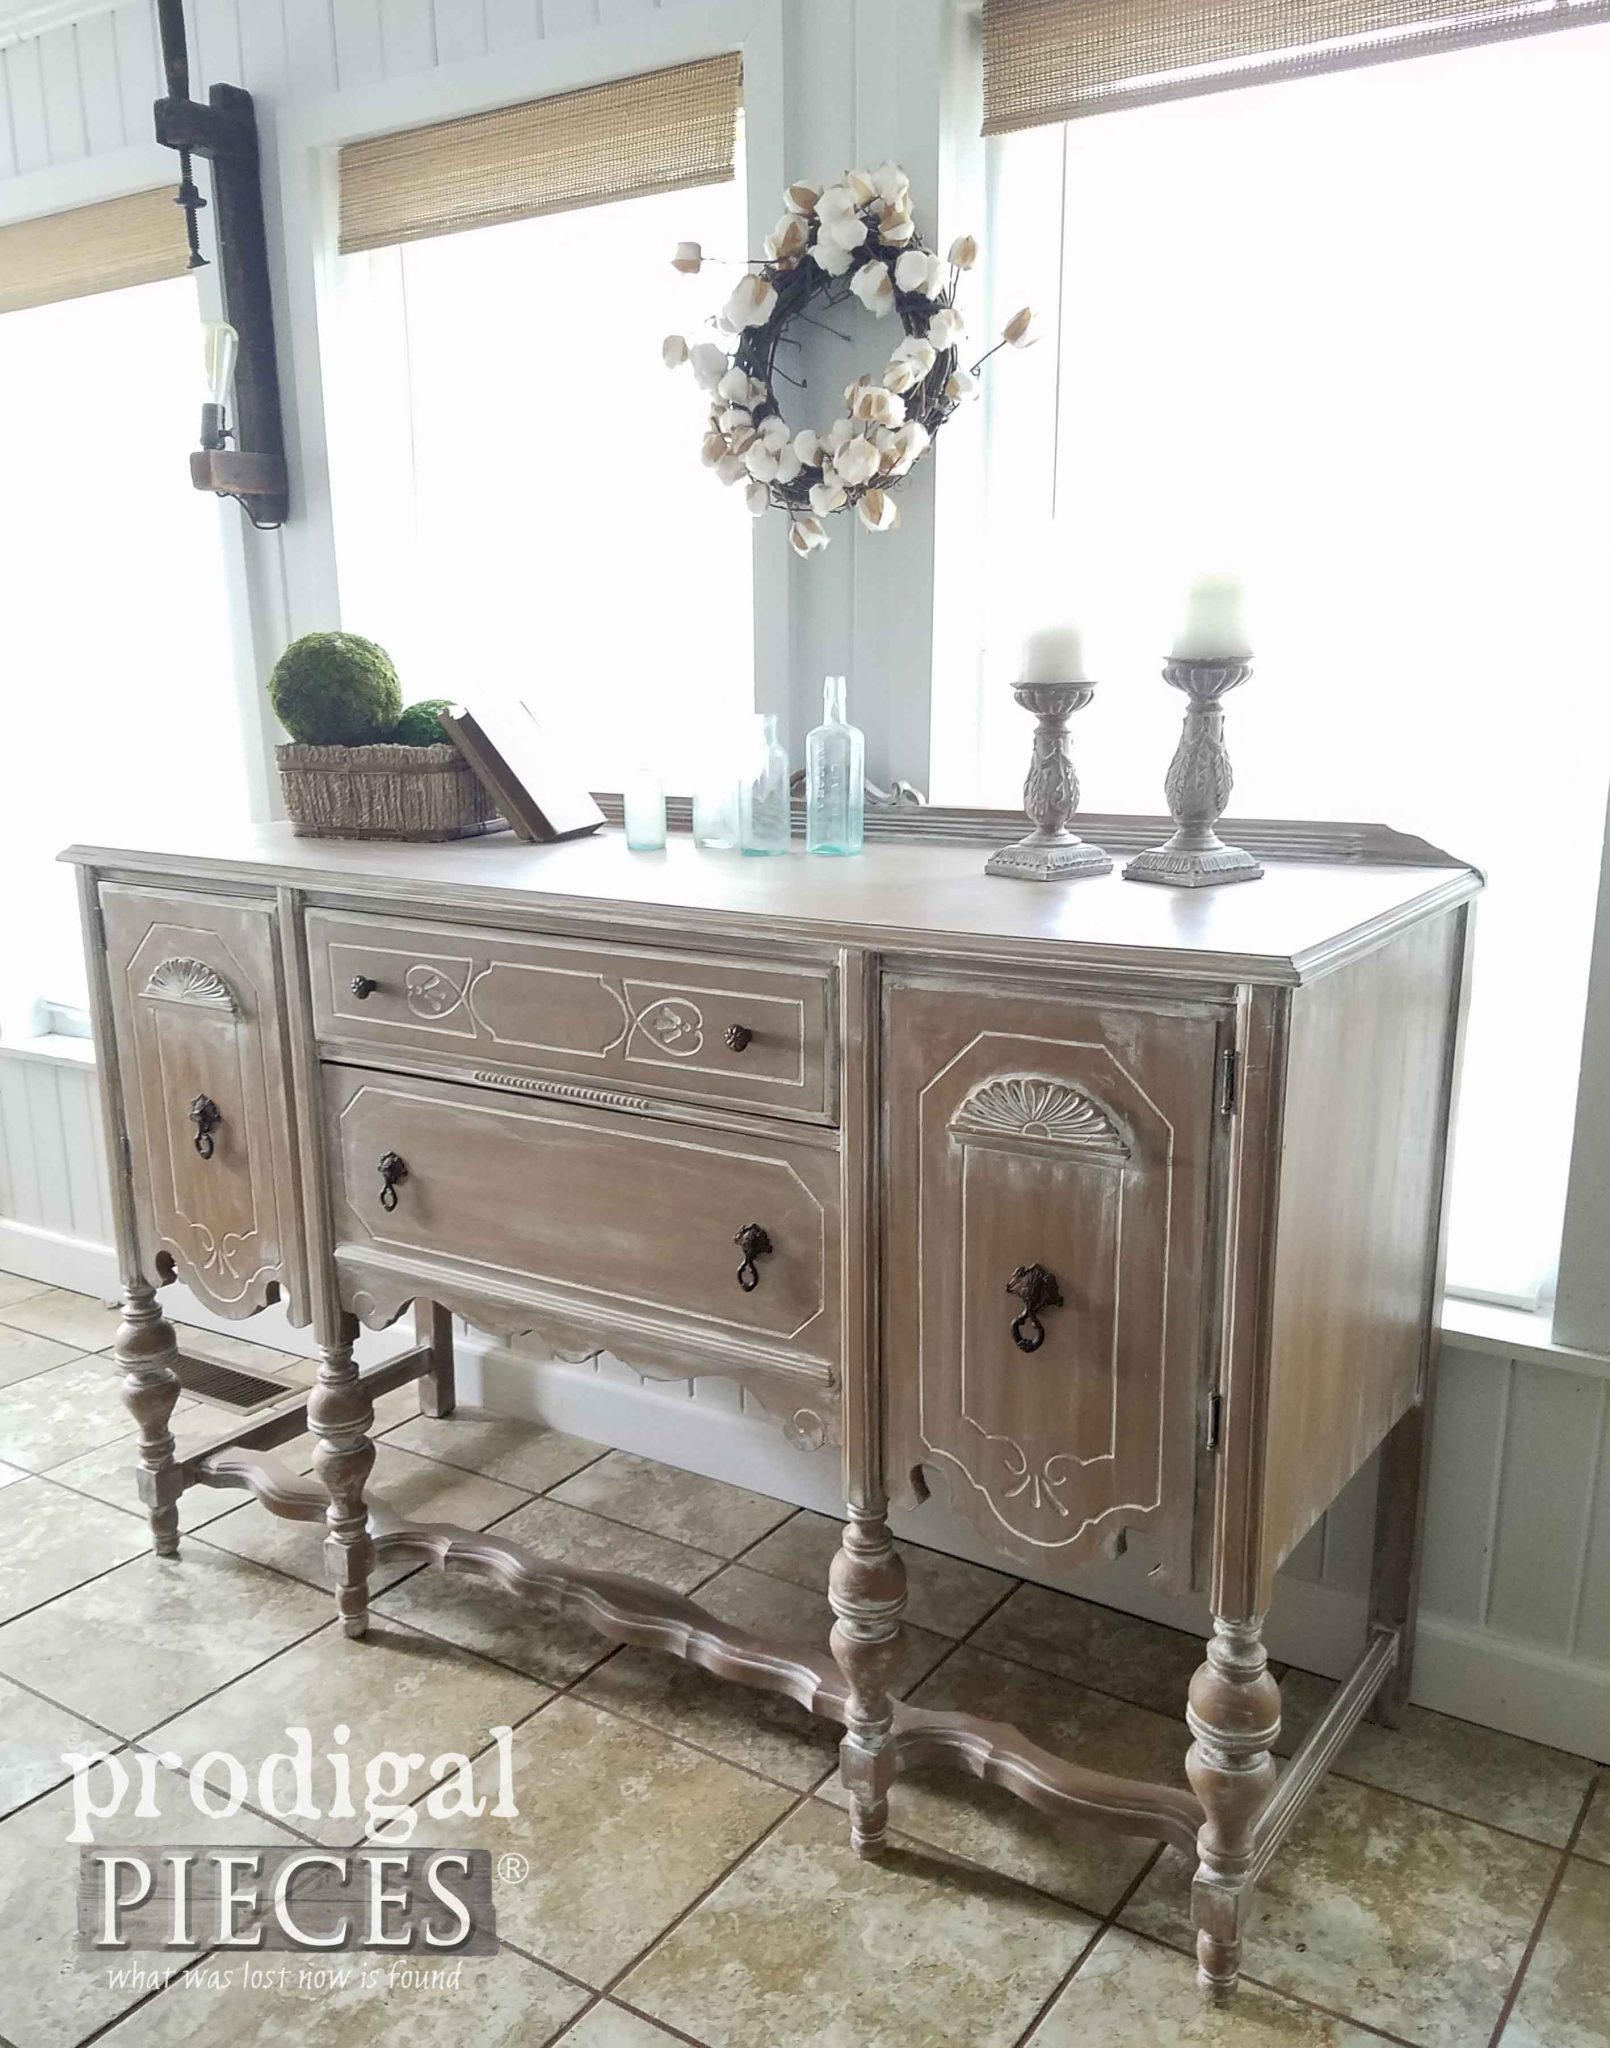 Antique Buffet Makeover with Farmhouse Style by Prodigal Pieces | prodigalpieces.com